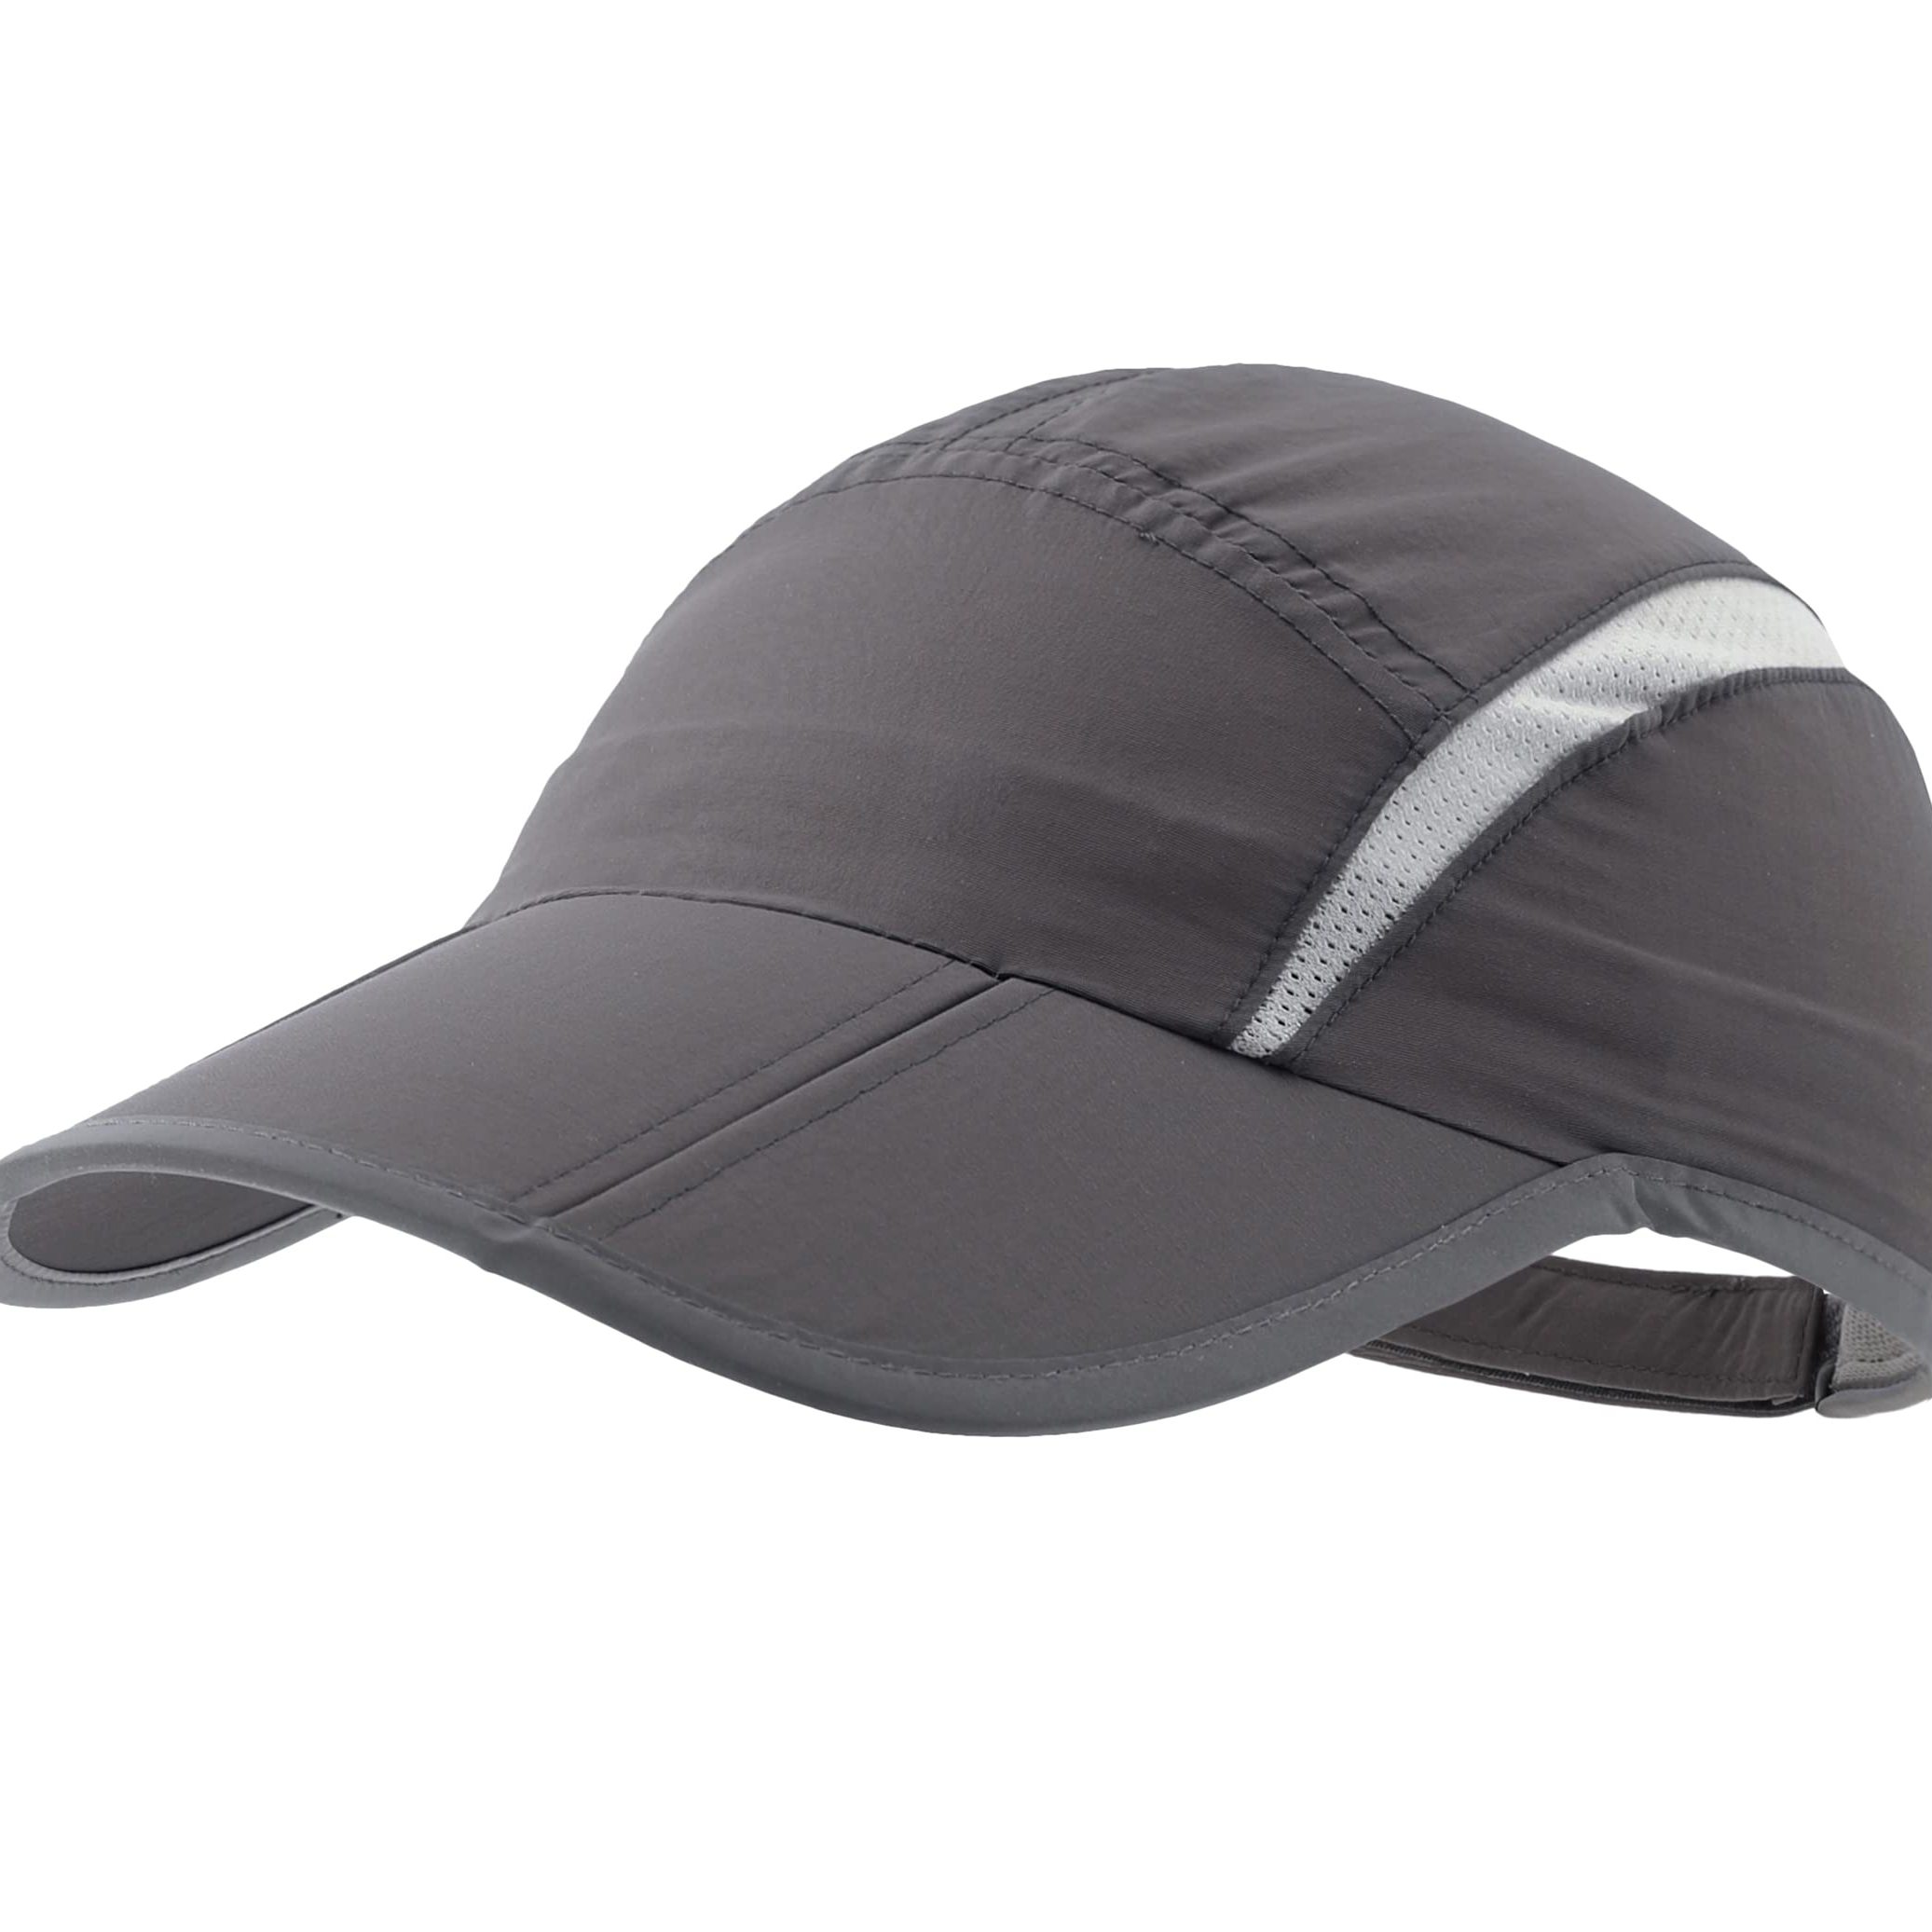 Foldable Mesh Sports Cap with Reflective Stripe Breathable Sun